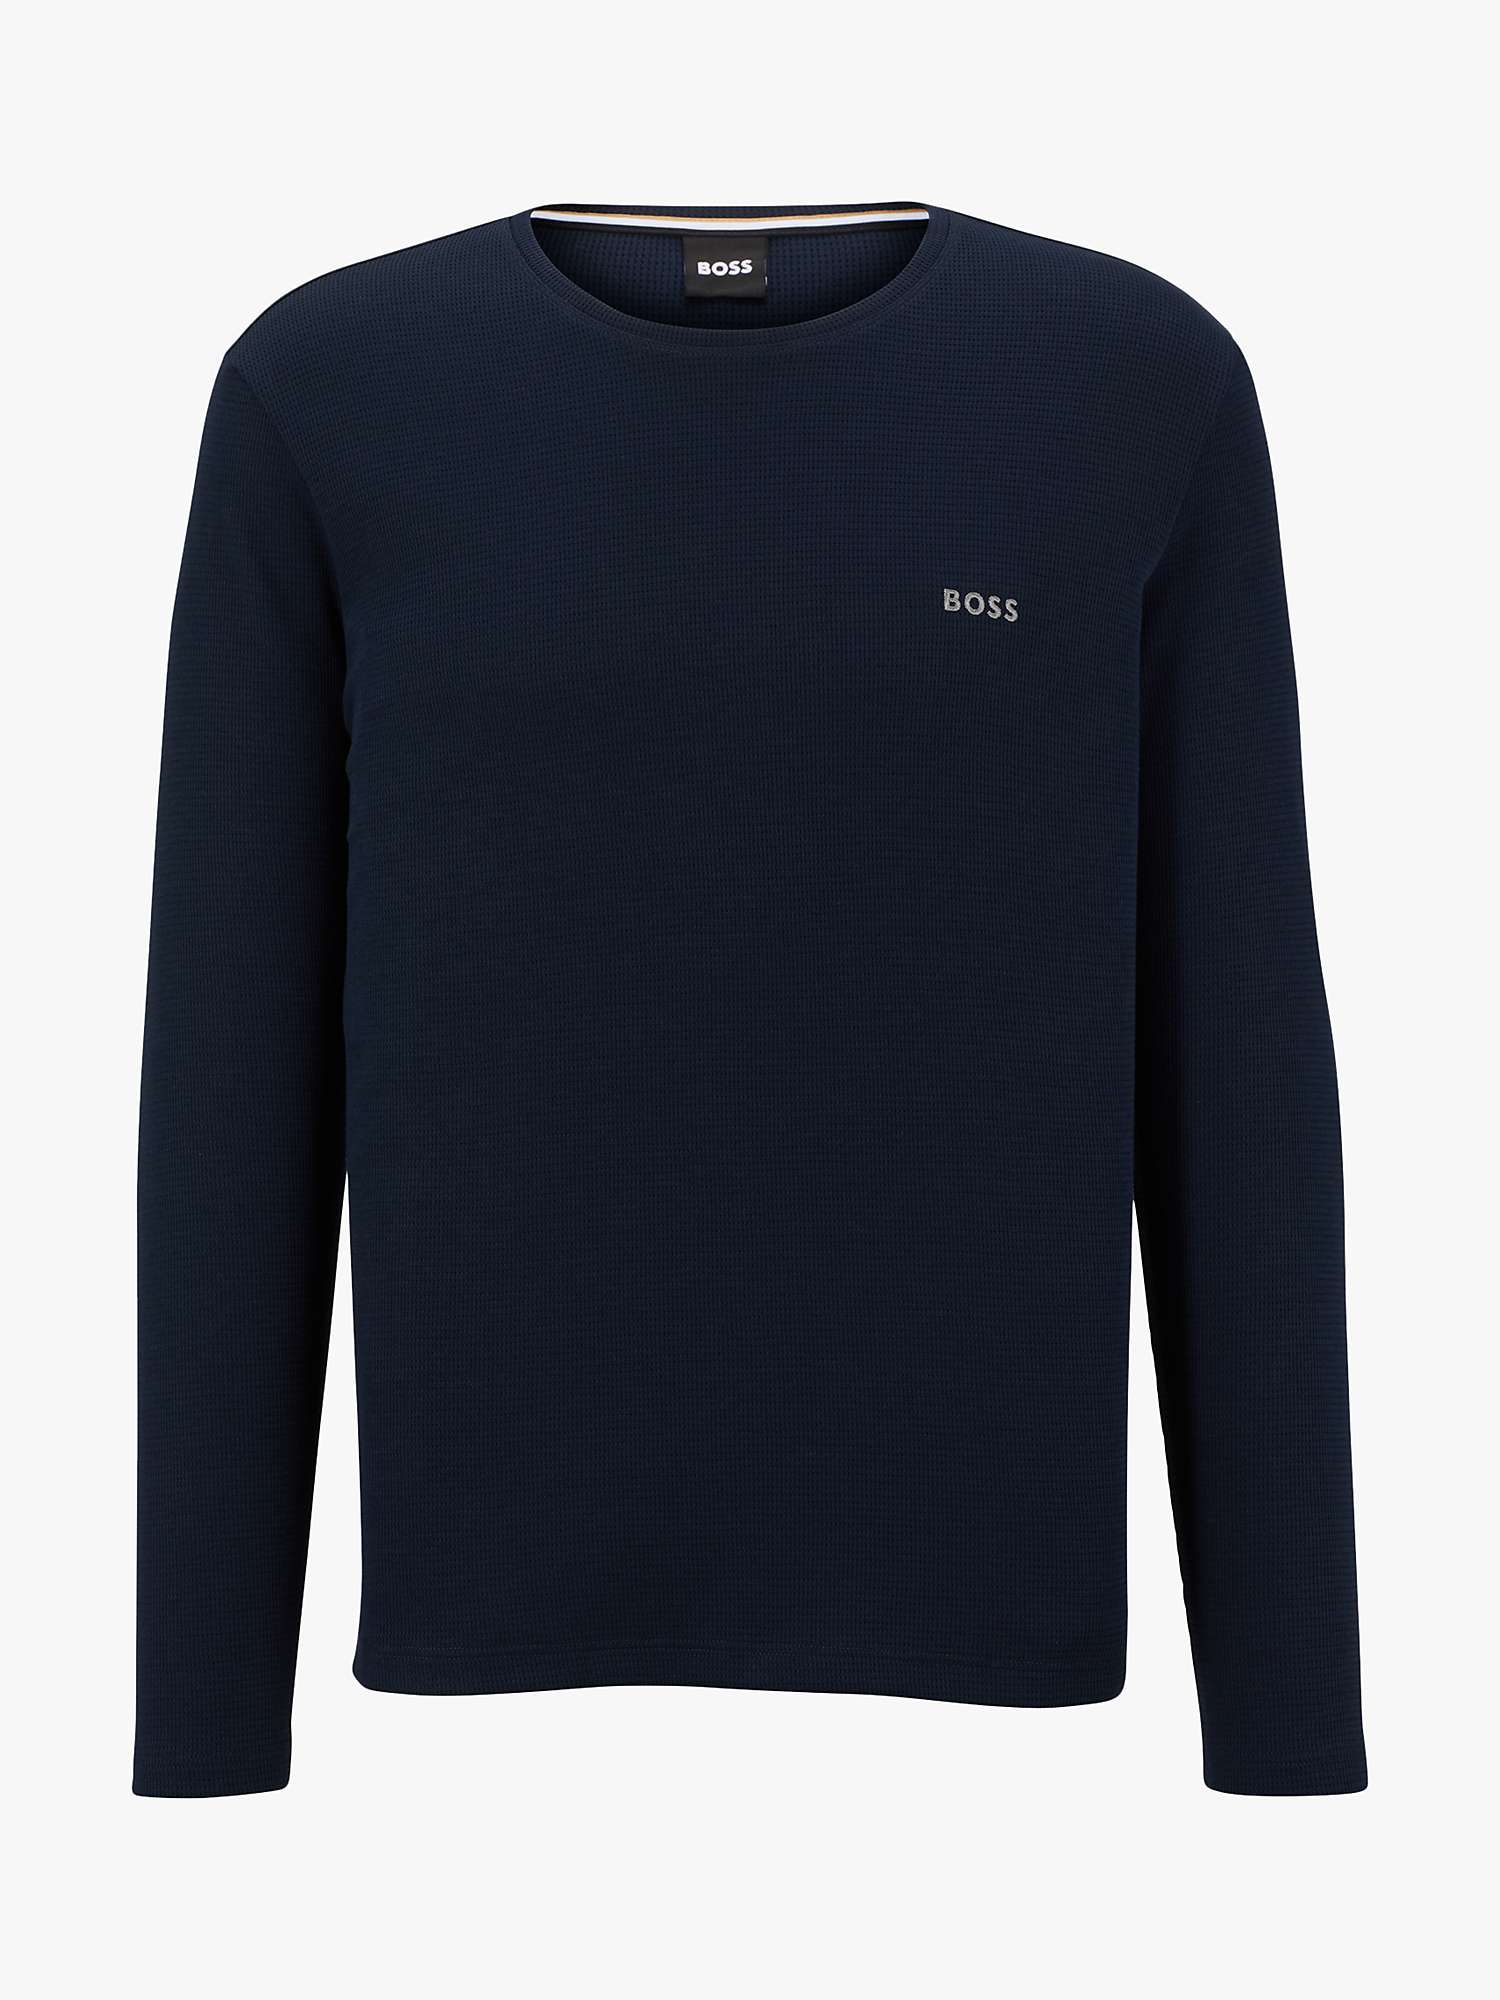 Buy BOSS Waffle Long Sleeve Lounge Top Online at johnlewis.com